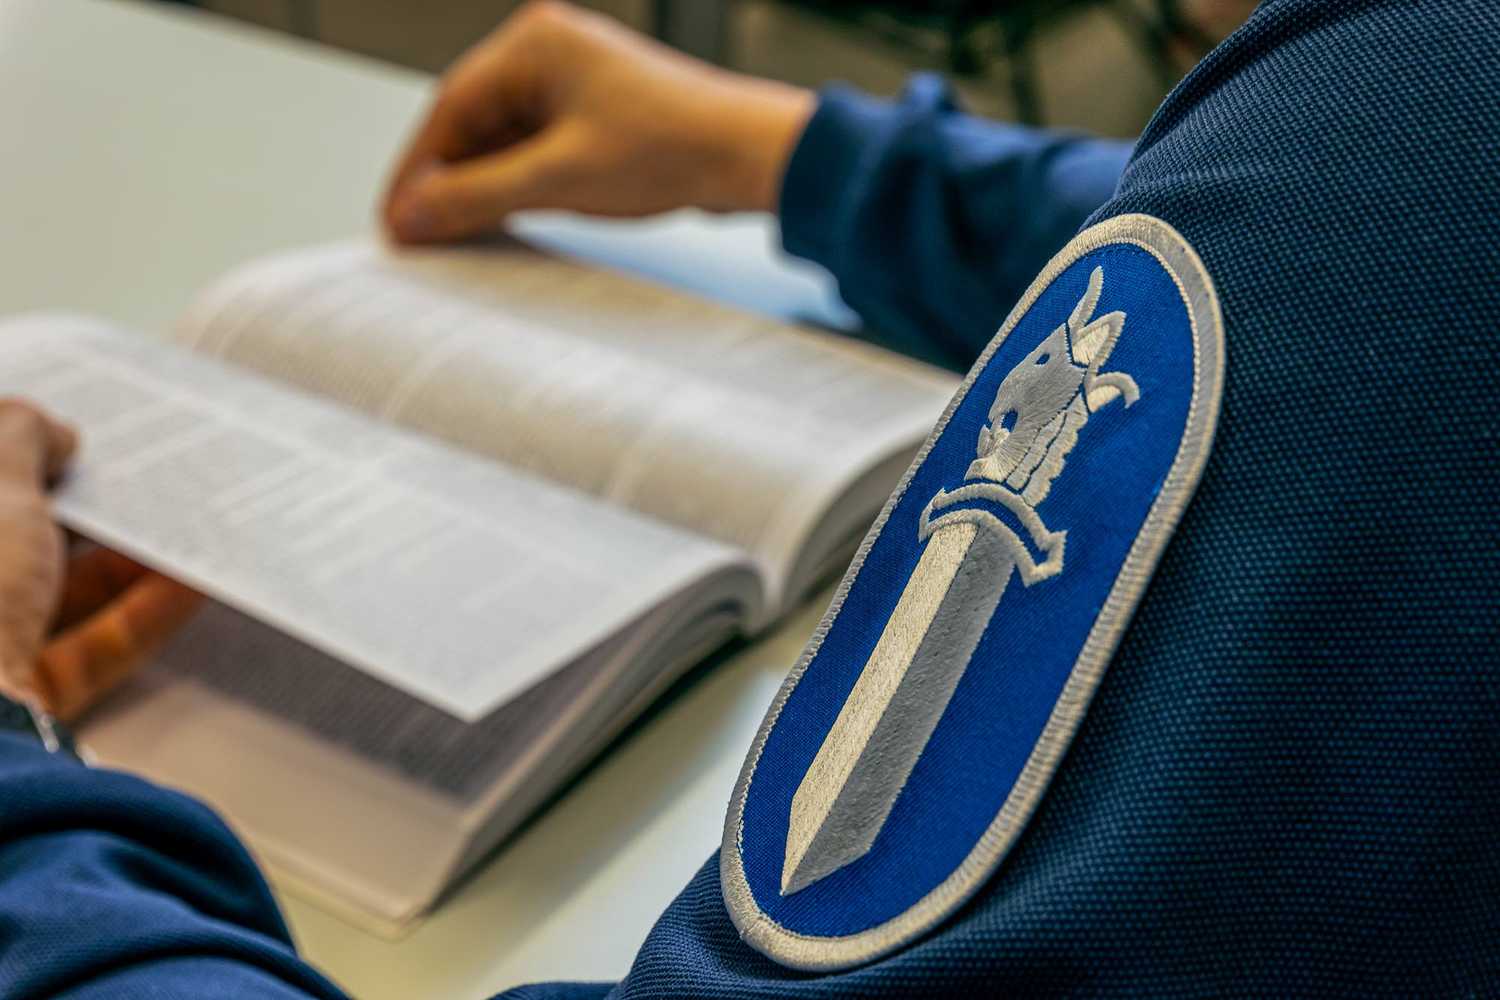 A police officer is reading a law book. Police sleeve badge with sword logo in the foreground.